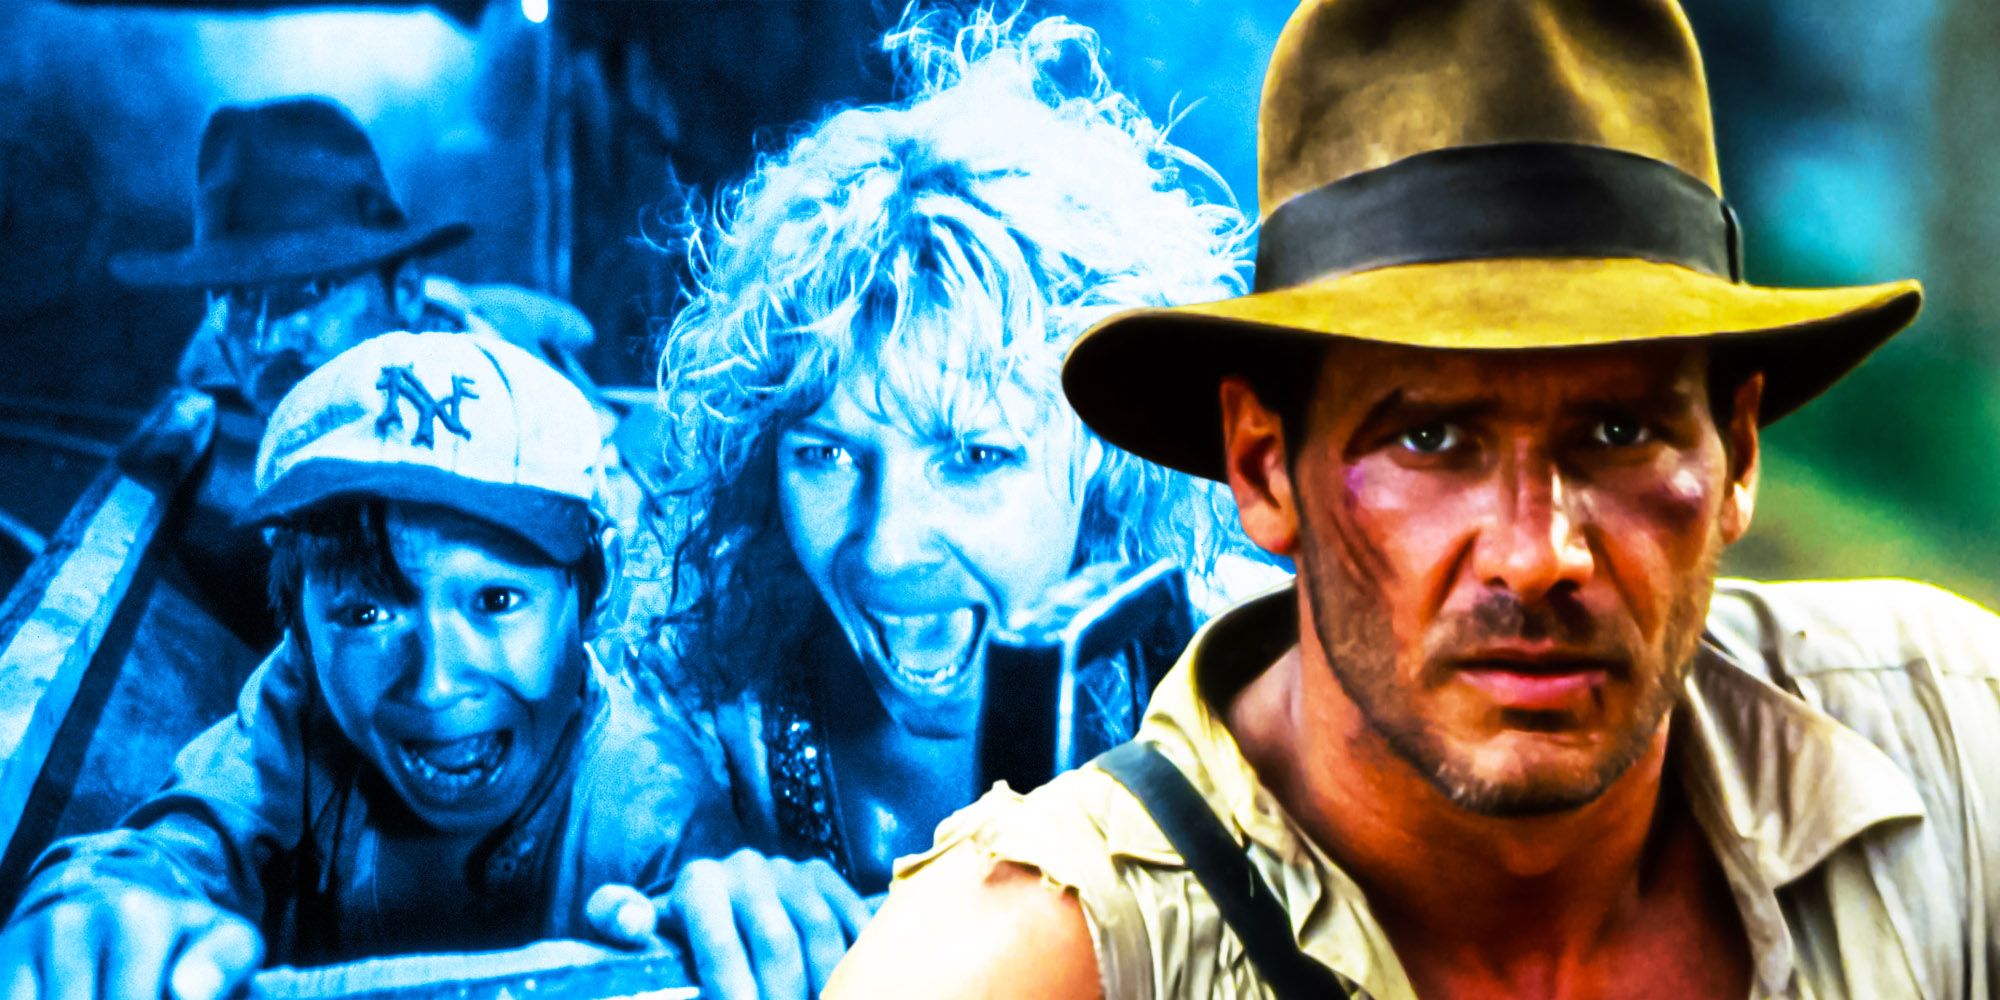 How To Watch The Indiana Jones Movies In Order (Chronologically